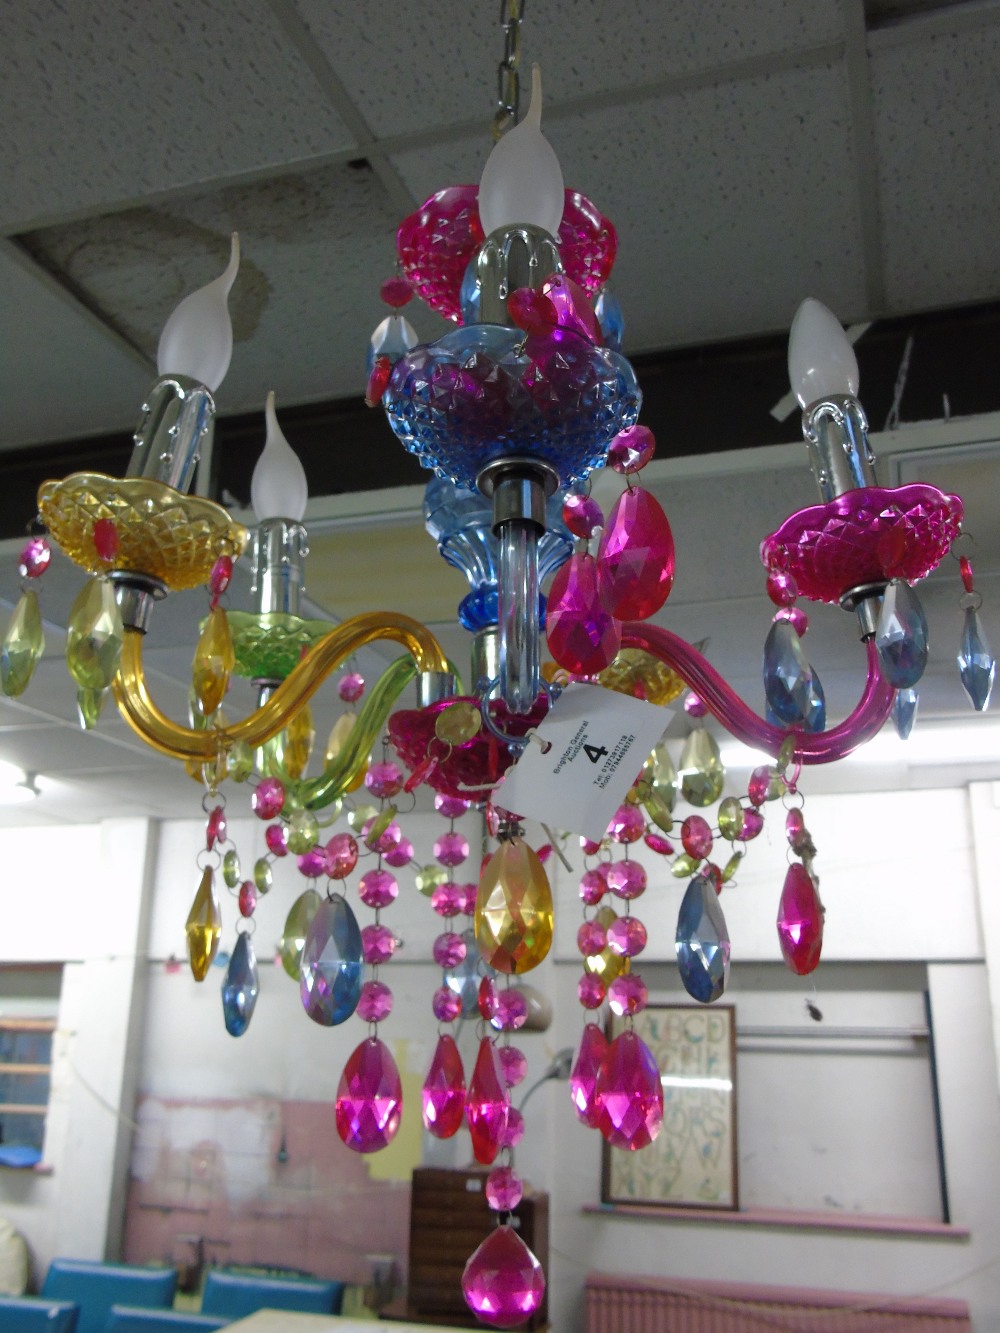 COLOURED GLASS CHANDELIER IN WORKING ORDER